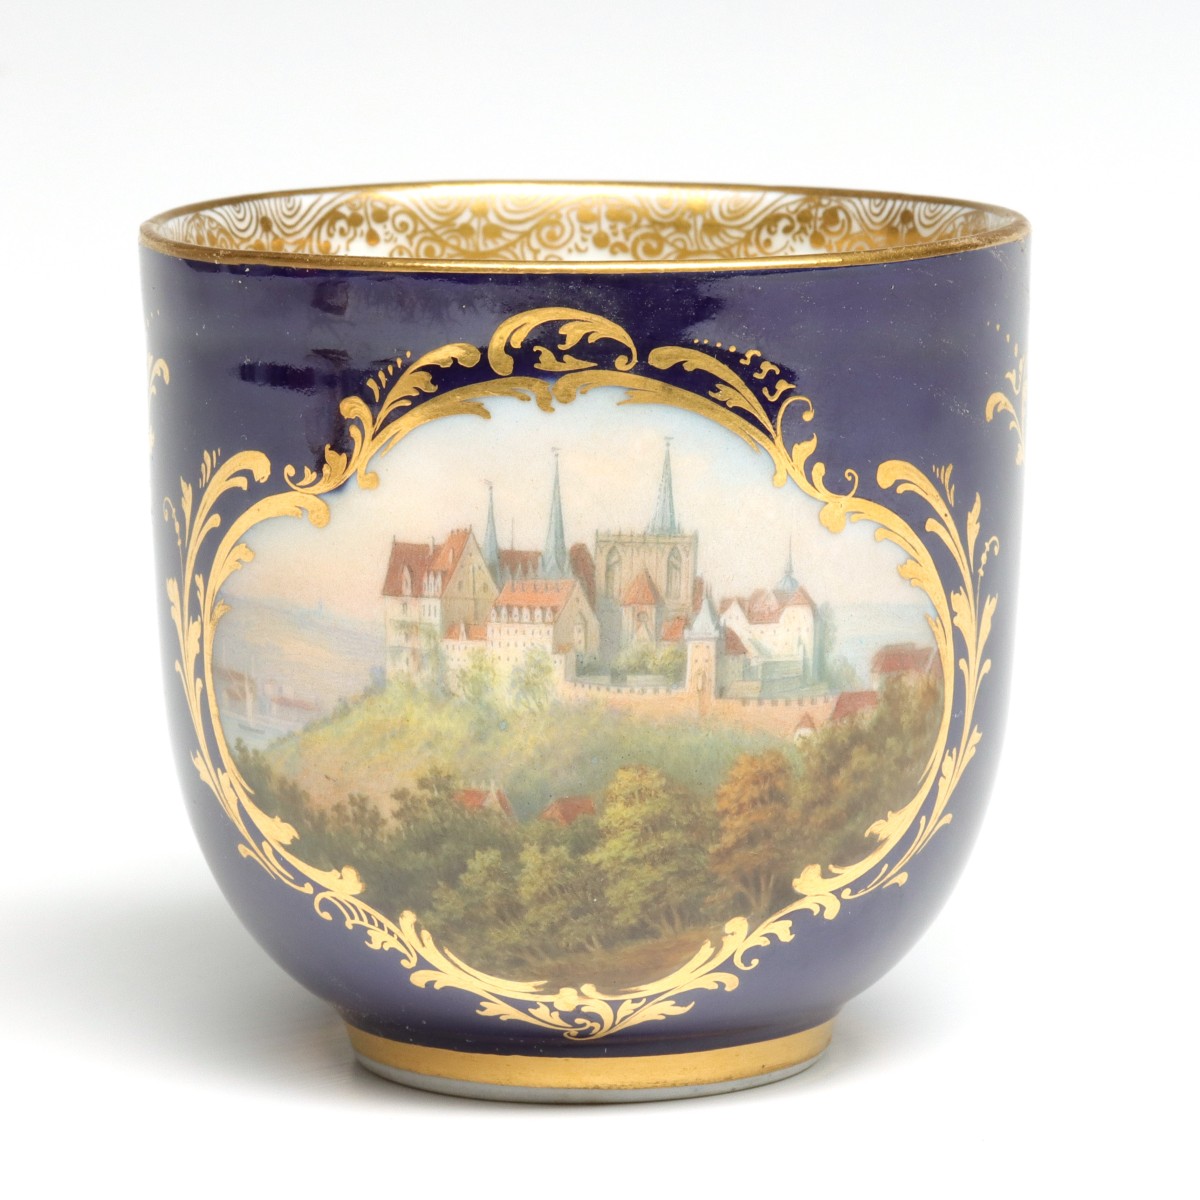 A MEISSEN CABINET CUP WITH VIEW OF ALBRECHTSBURG